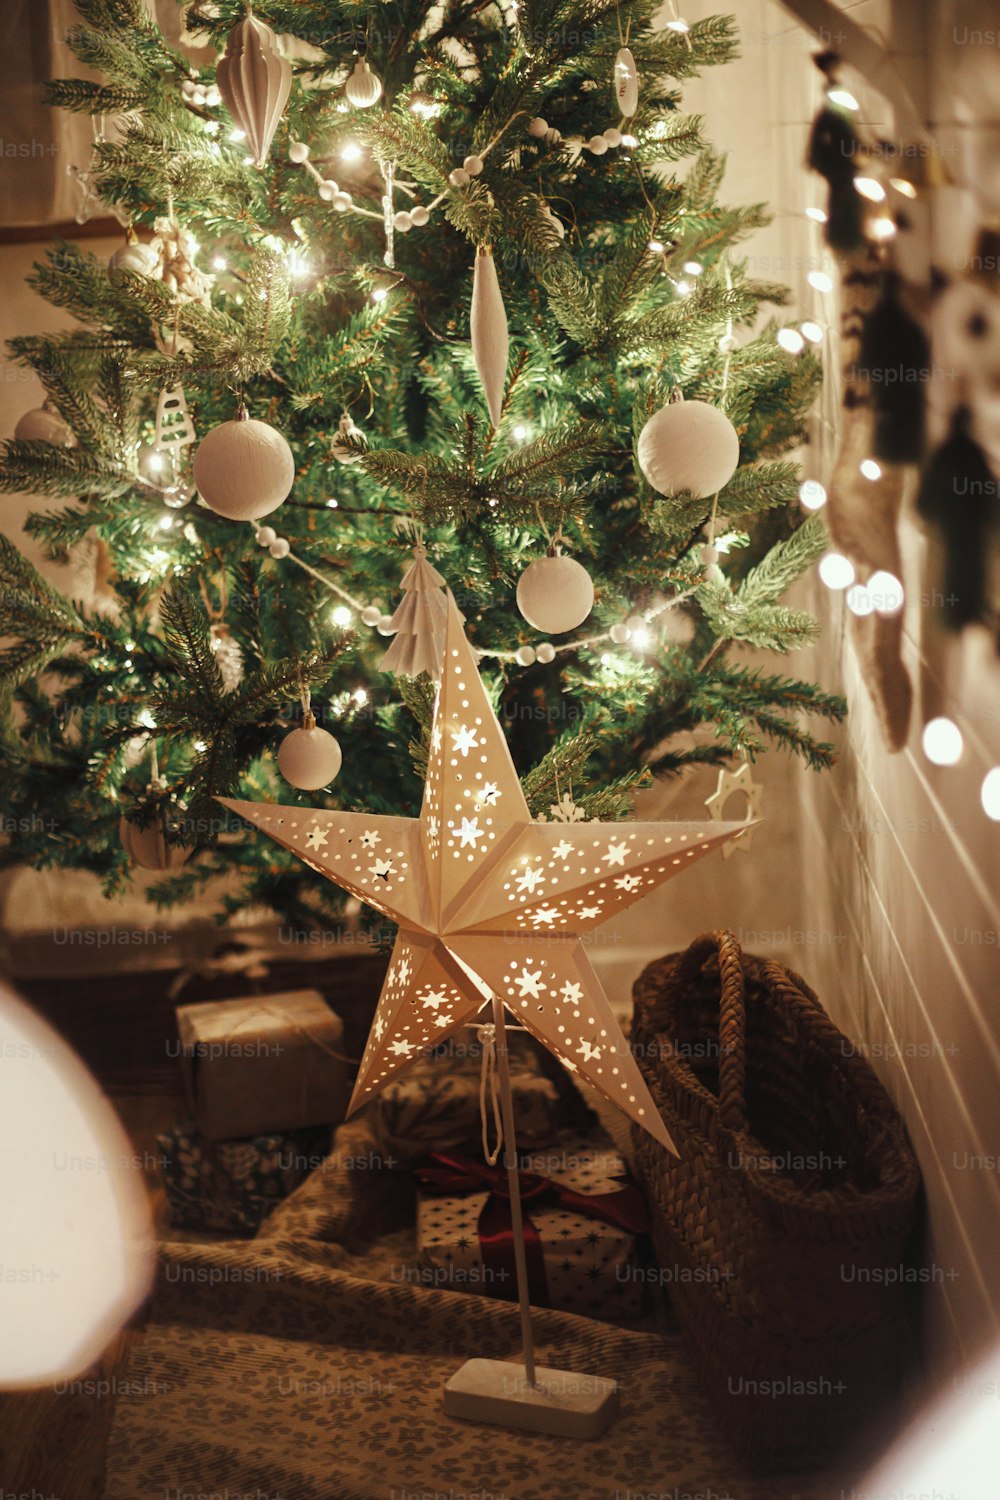 Stylish Christmas star, tree with white baubles, boho ornaments, golden lights and gifts in atmospheric evening room. Festive scandinavian room at eve. Magic time. Space for text. Merry Christmas!